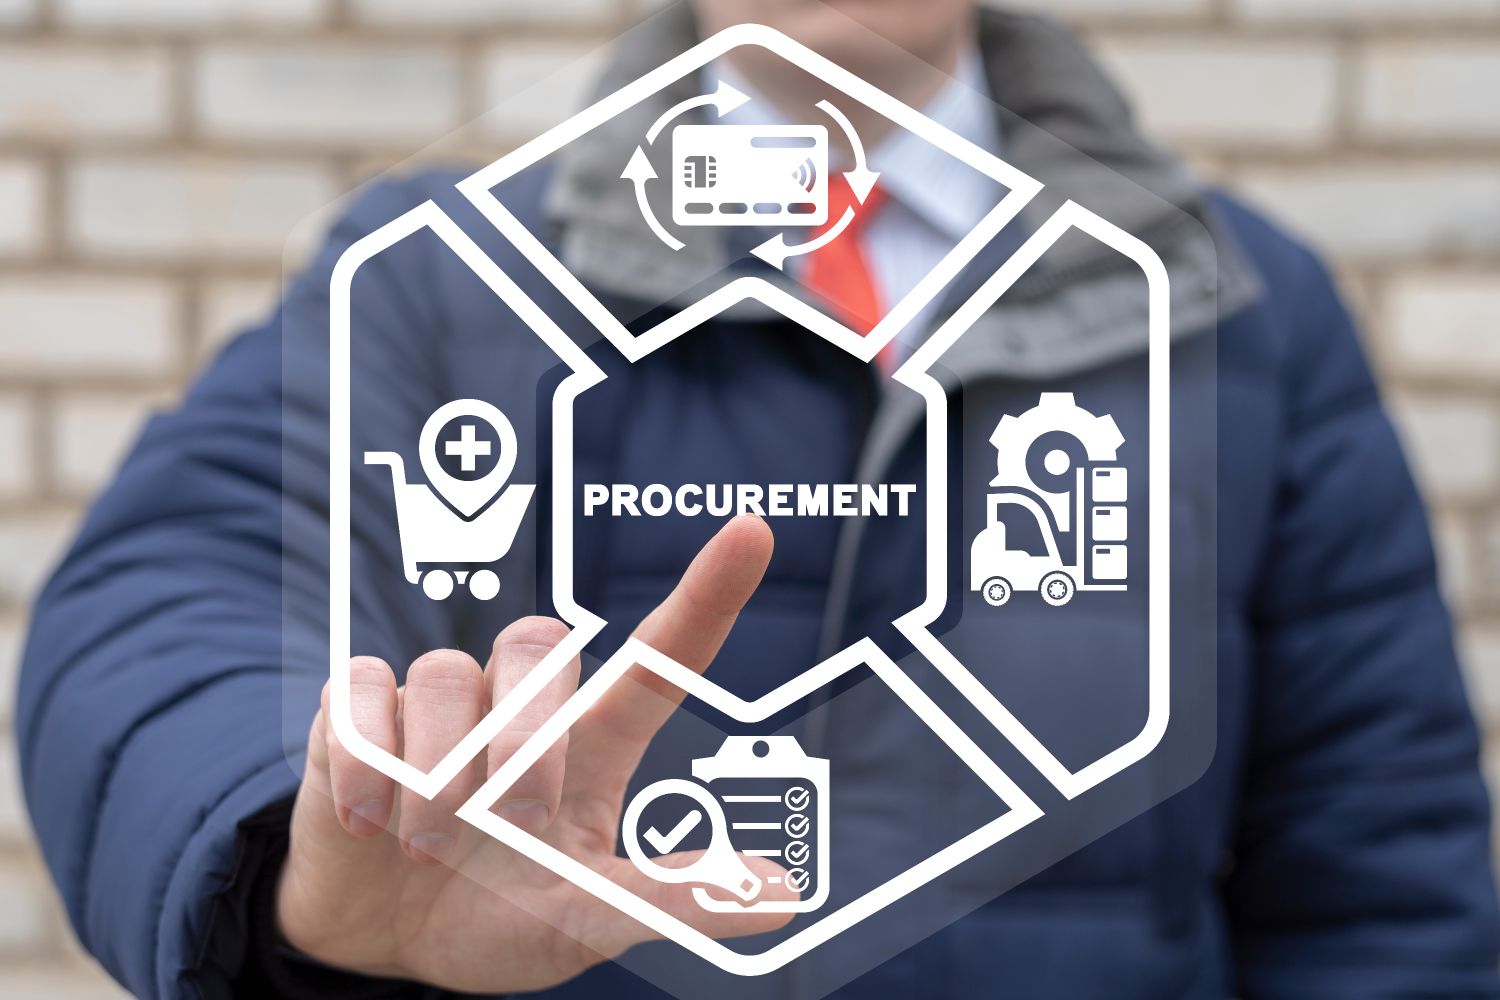 Image cloud with the word Procurement in the center